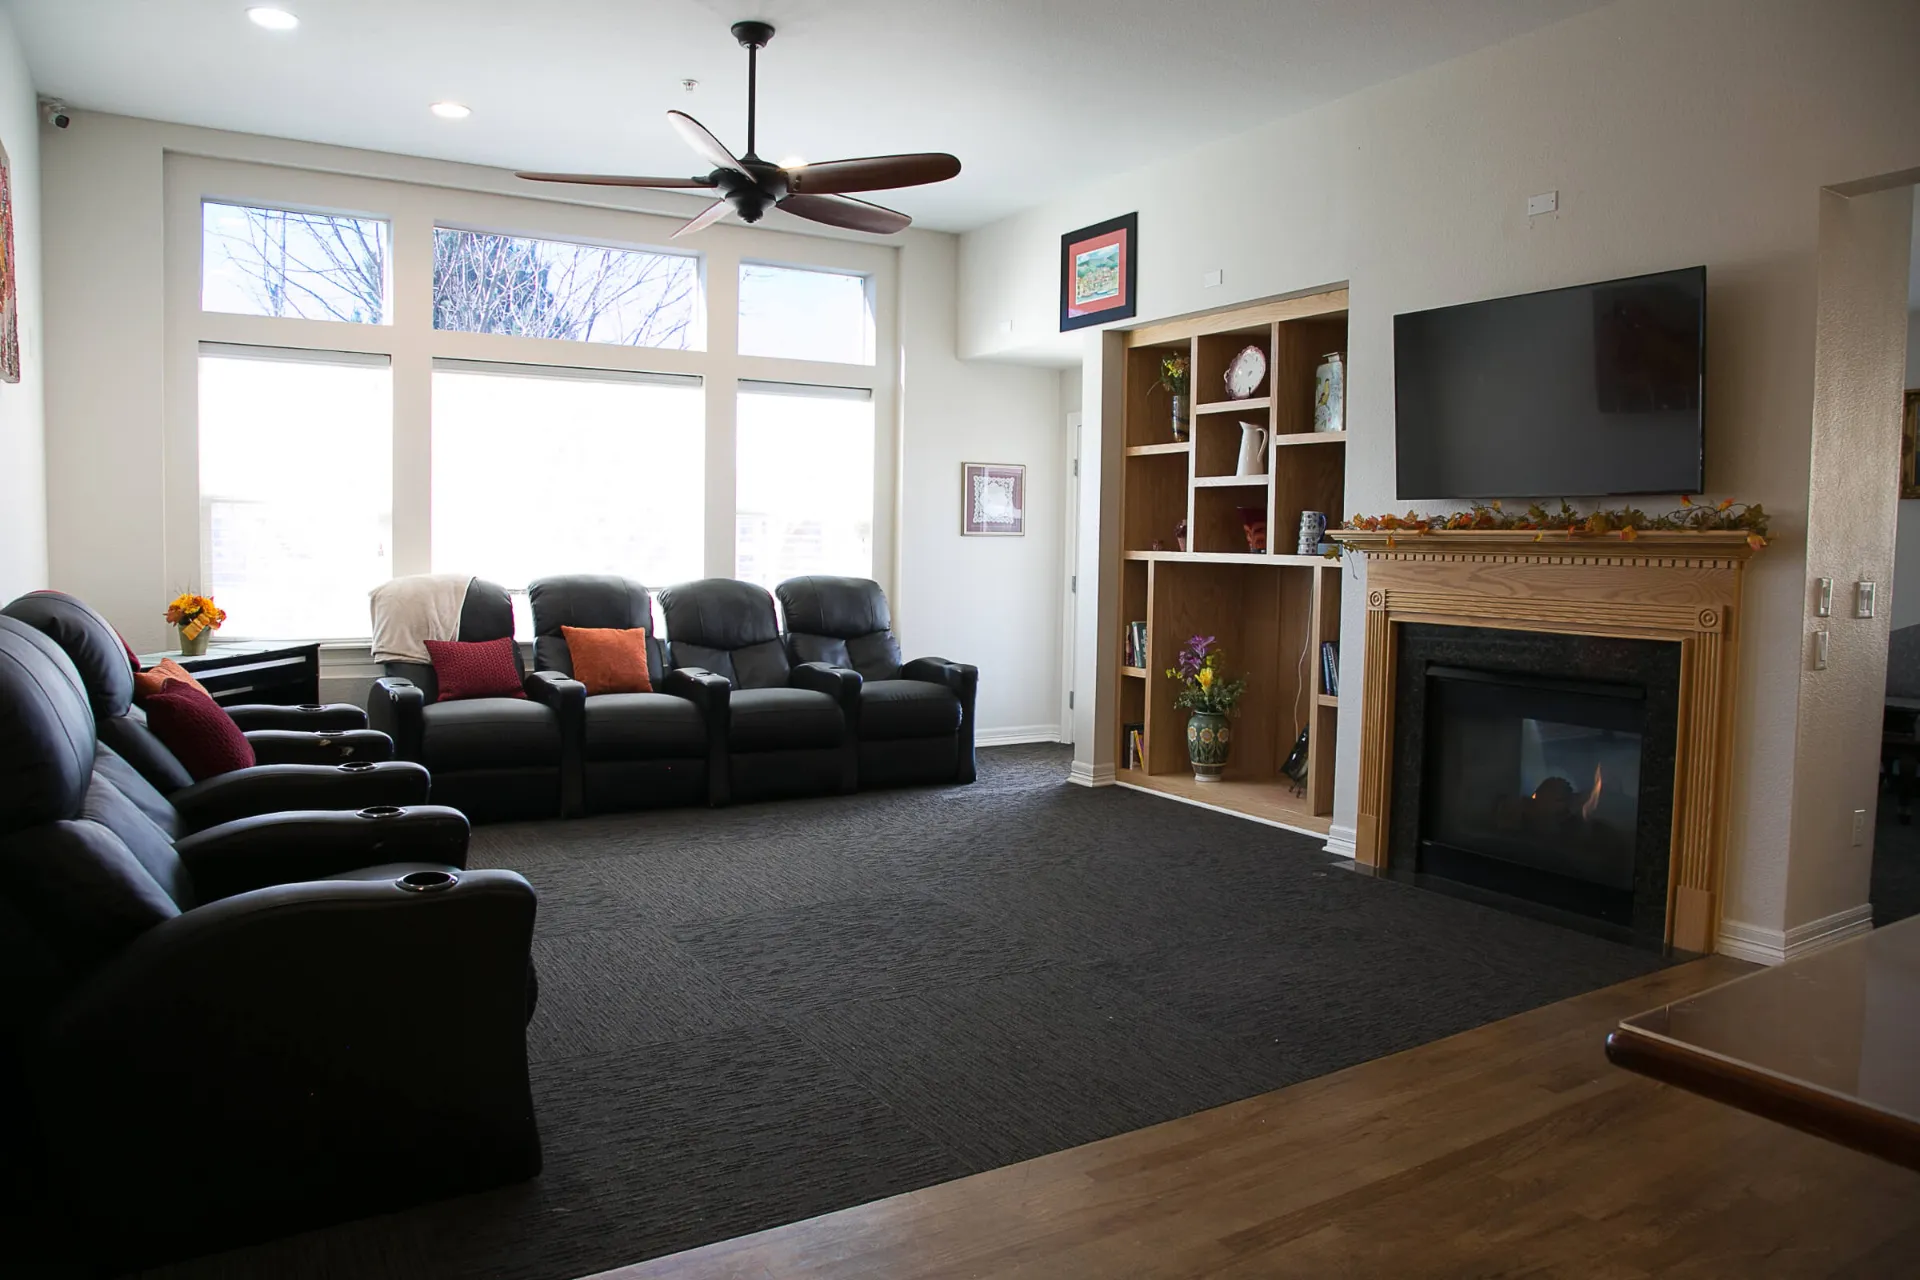 A living room displaying couches and entertainment system.